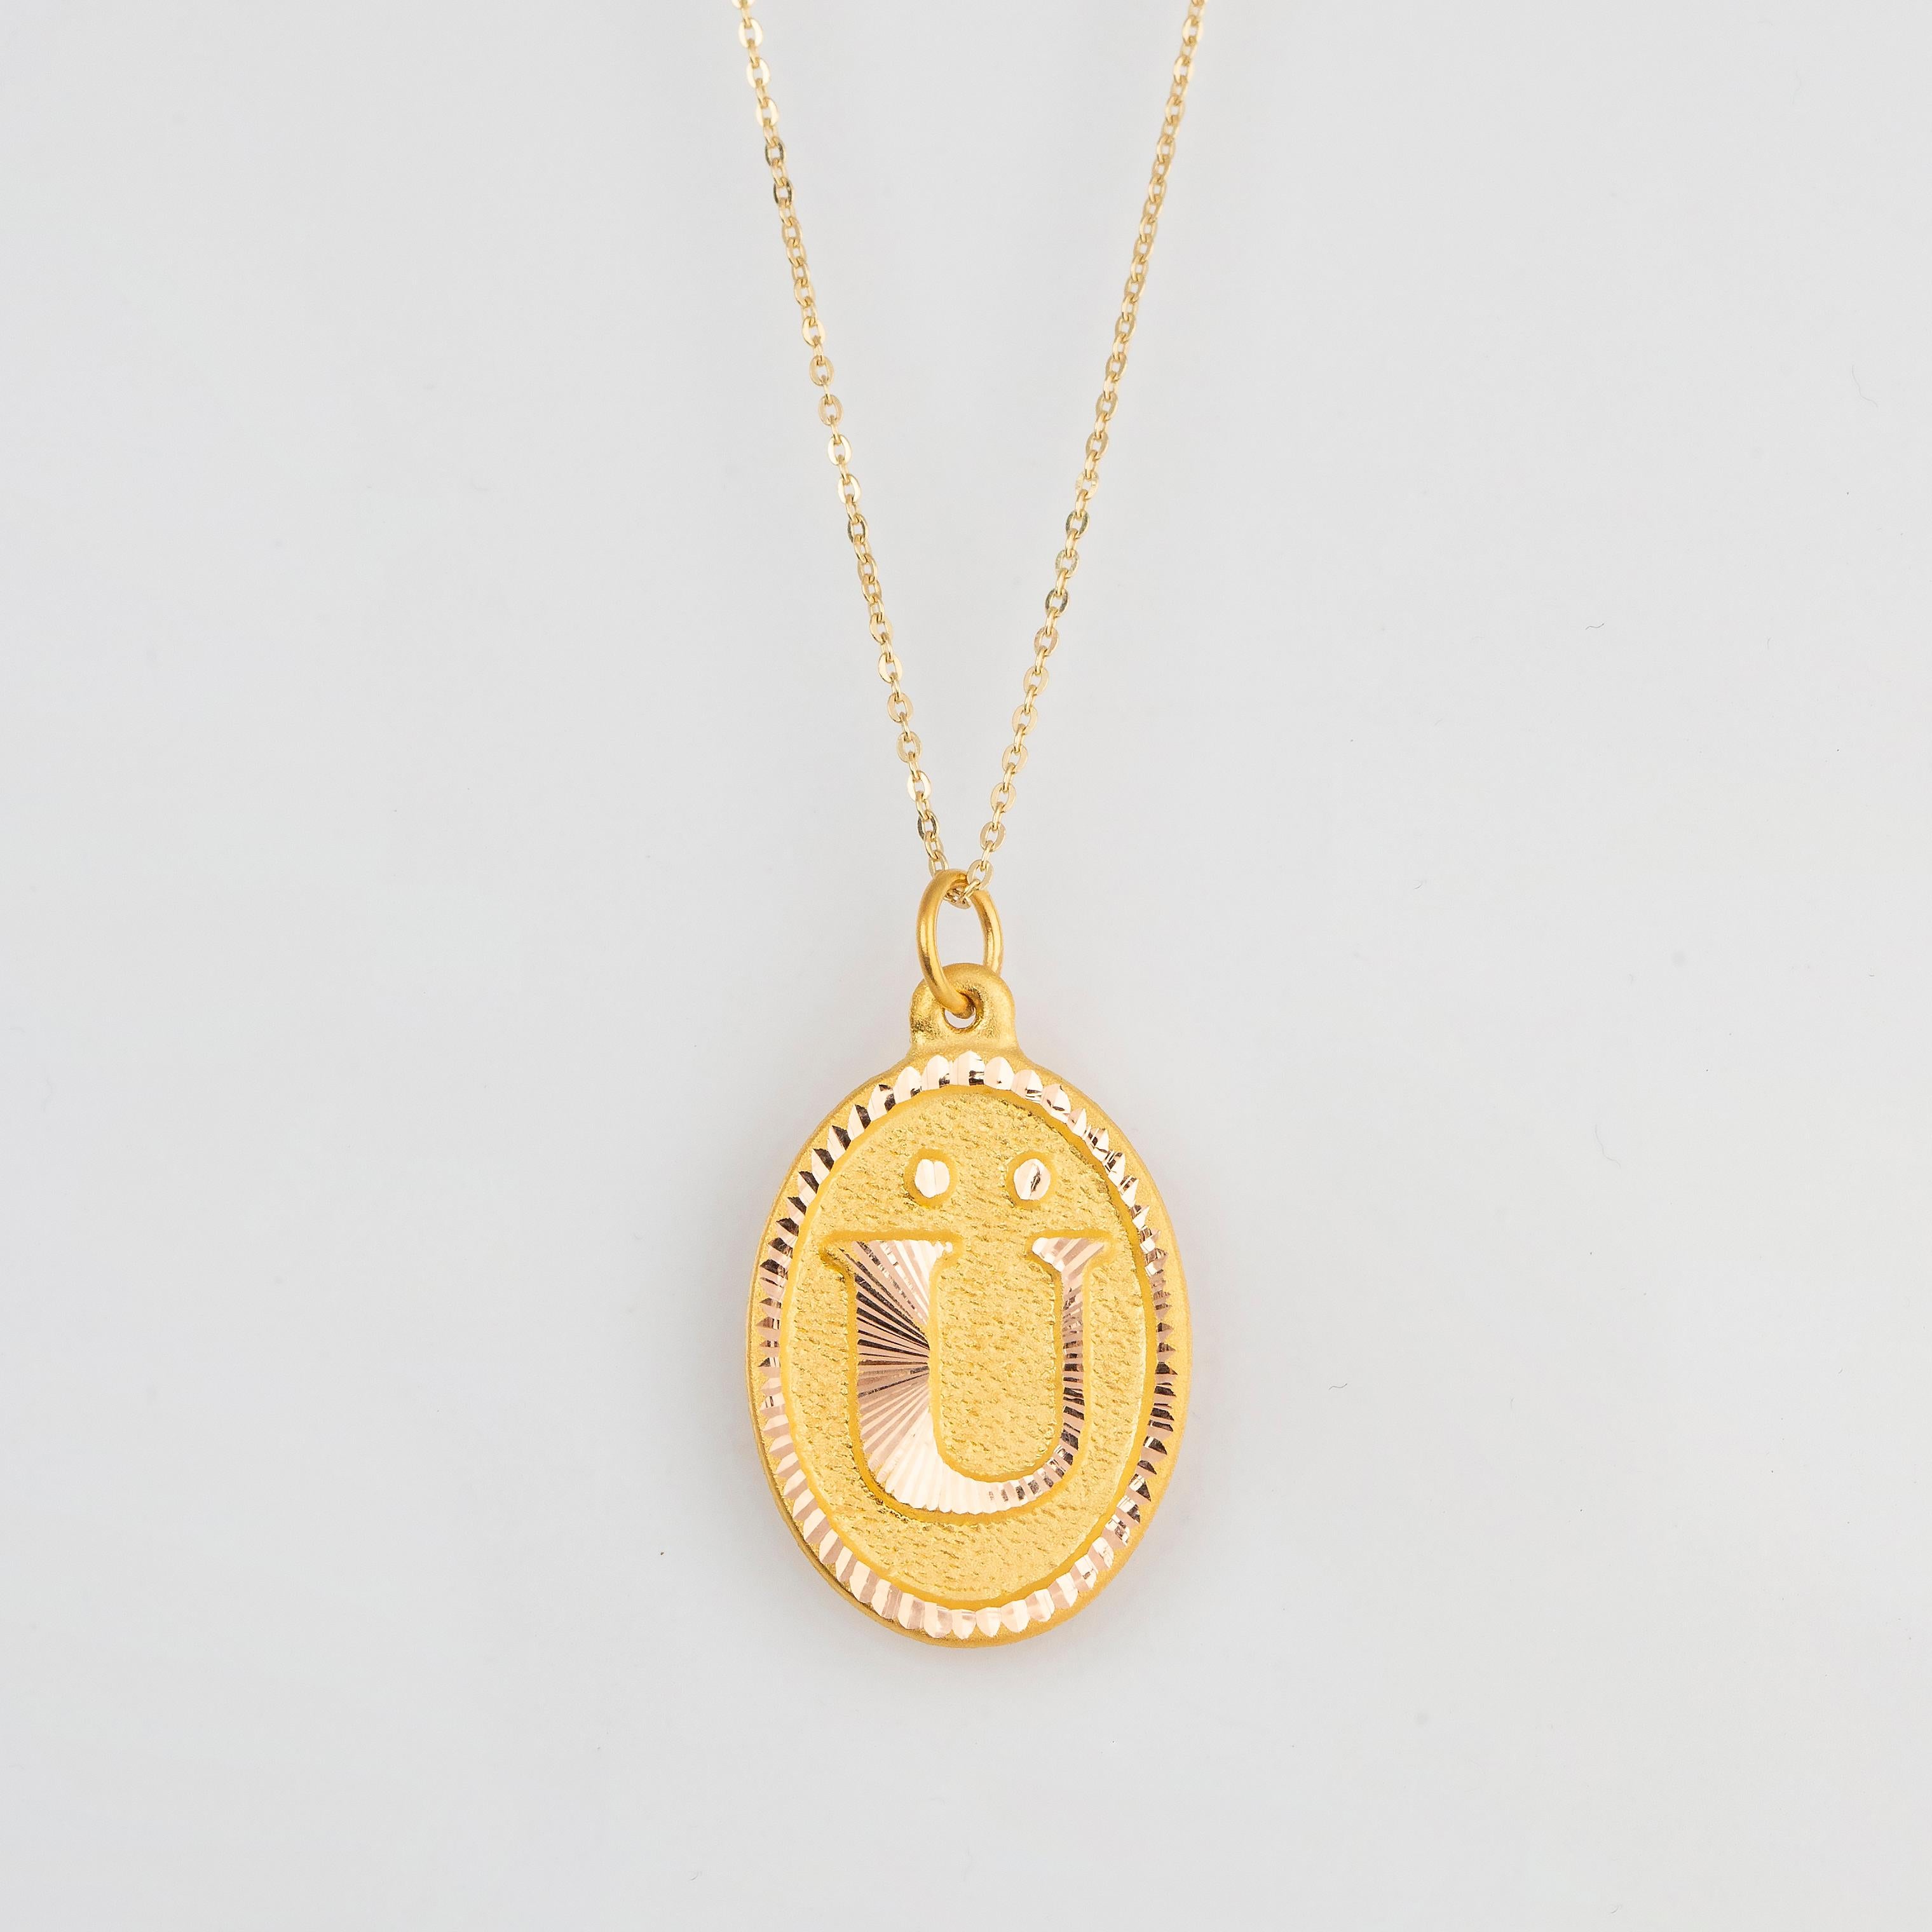 14K Gold Necklaces, Letter Necklace Models, Letter T Gold Necklace-Gift Necklace Models, Daily Necklaces, Letter Jewelry

It's a manual labor product. 'Handmade'. Fashionable product.

This necklace was made with quality materials and excellent